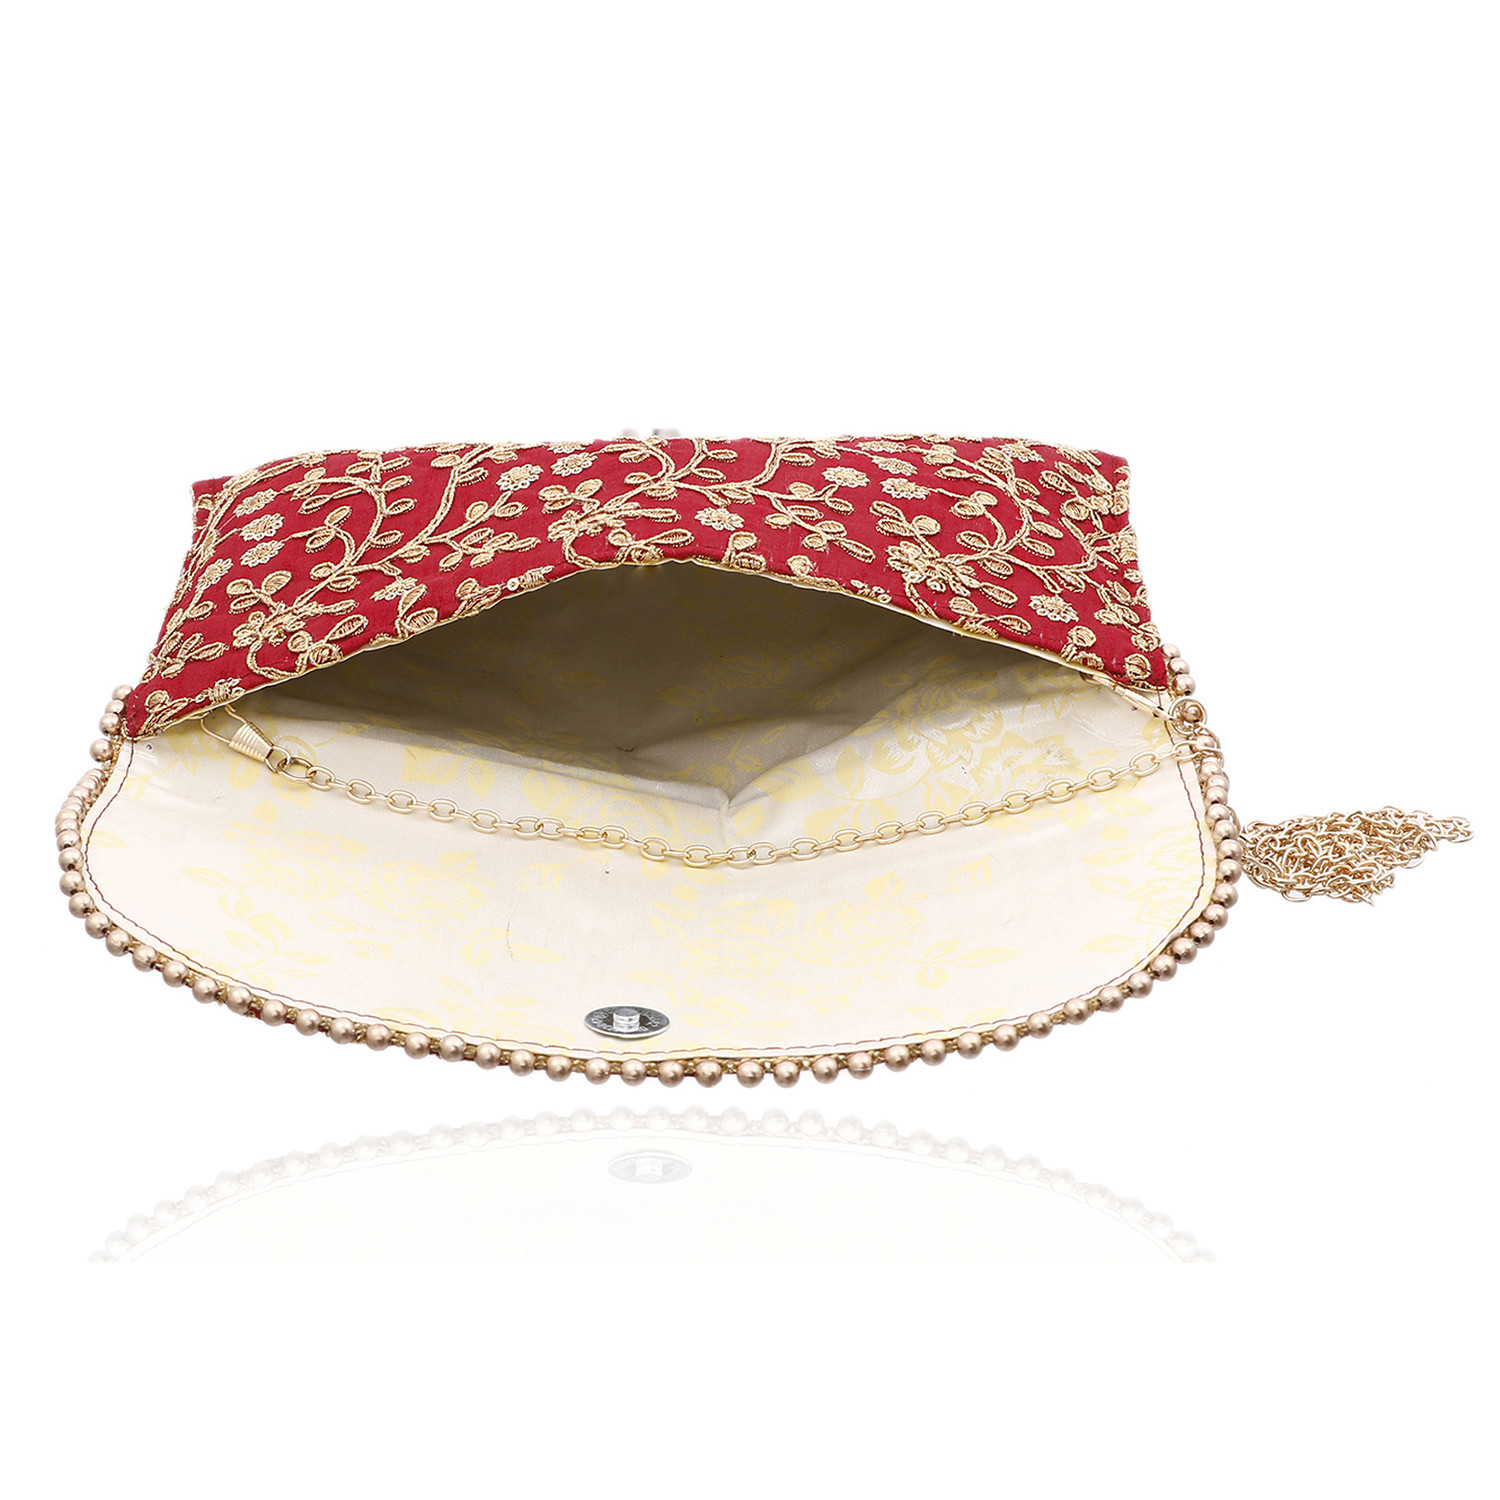 Kuber Industries Embroidery Golden Pearl Border Clutch|Hand Purse & Pearls Handle With Magnetic Lock For Woman,Girls (Maroon)